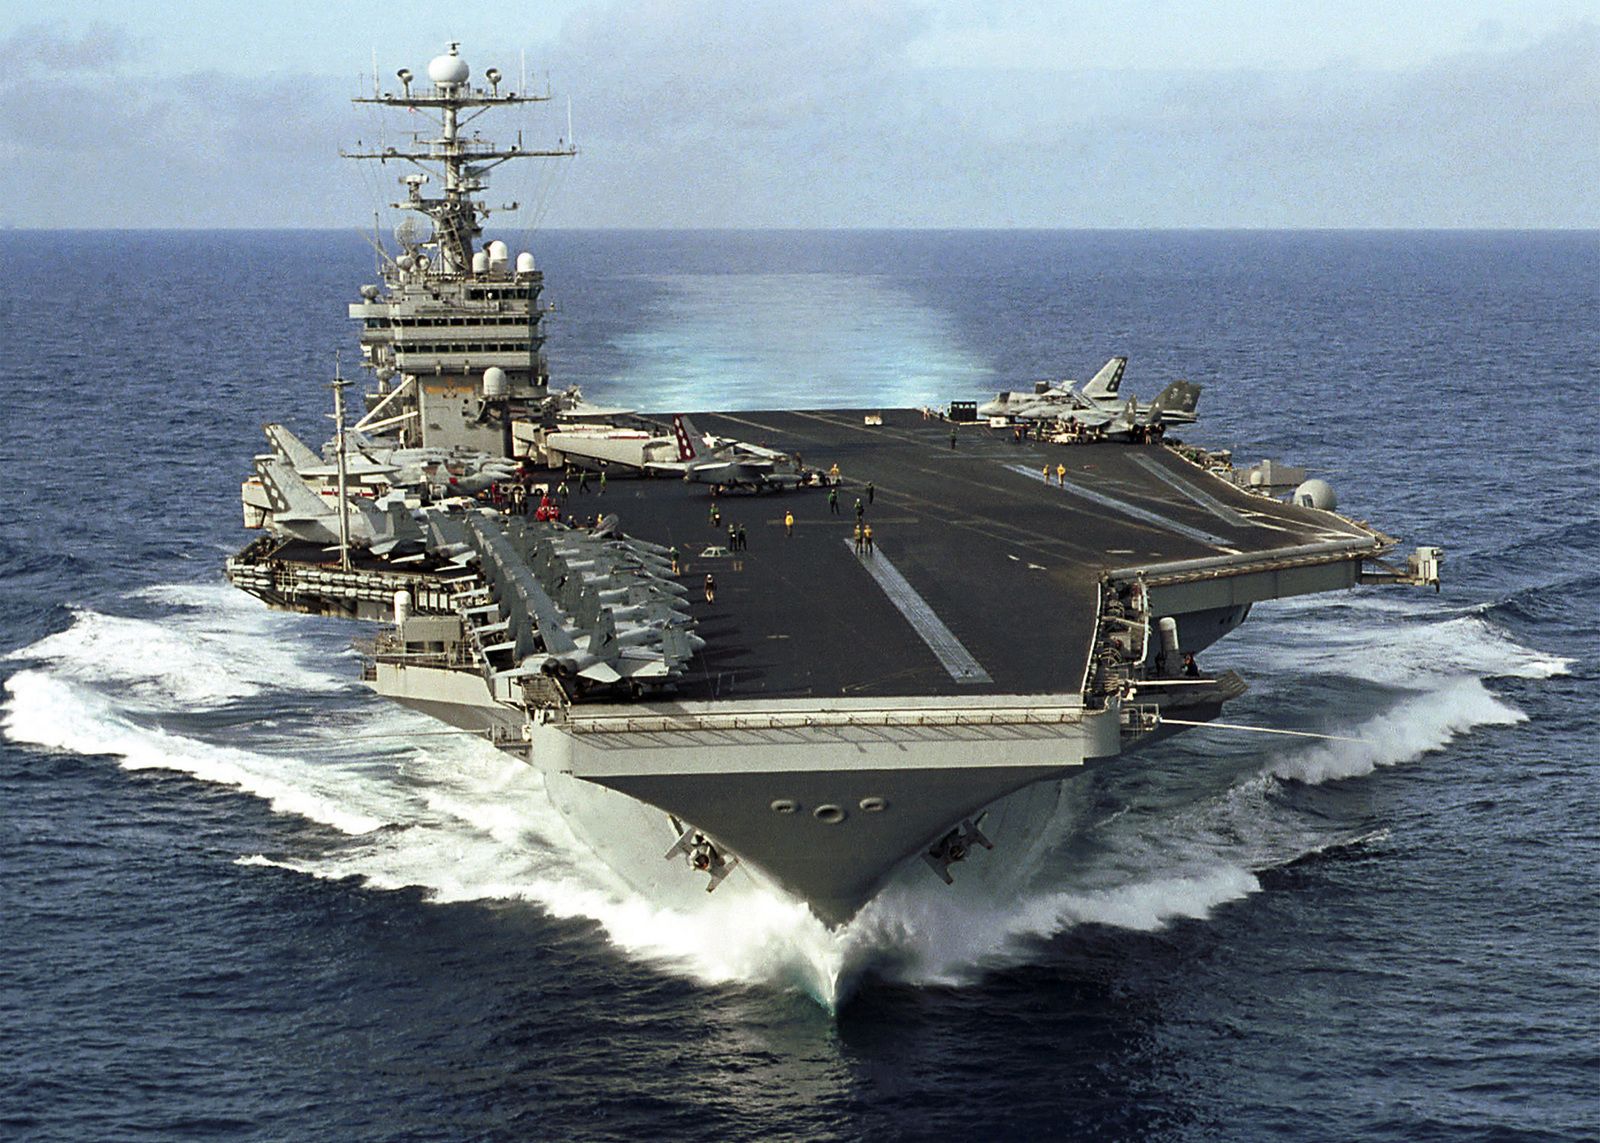 aerial-bow-on-view-of-the-nimitz-class-aircraft-carrier-uss-george-washington-9396a8-1600